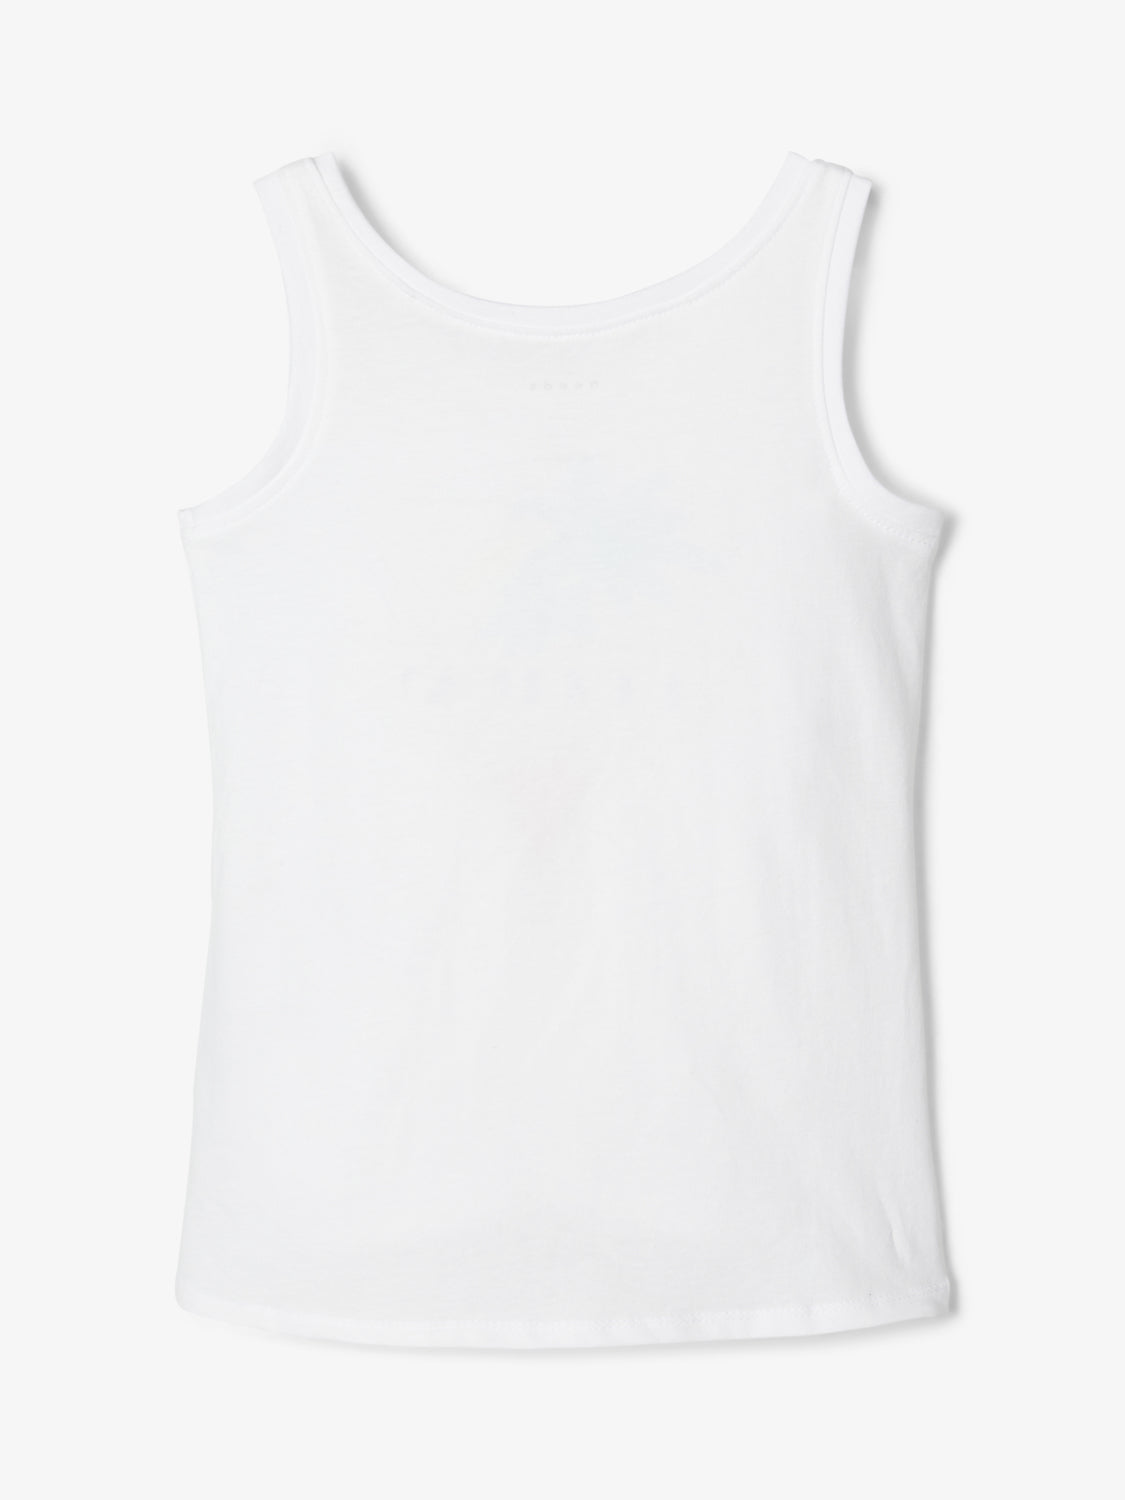 NMFVEEN T-shirts & Tops - Bright White